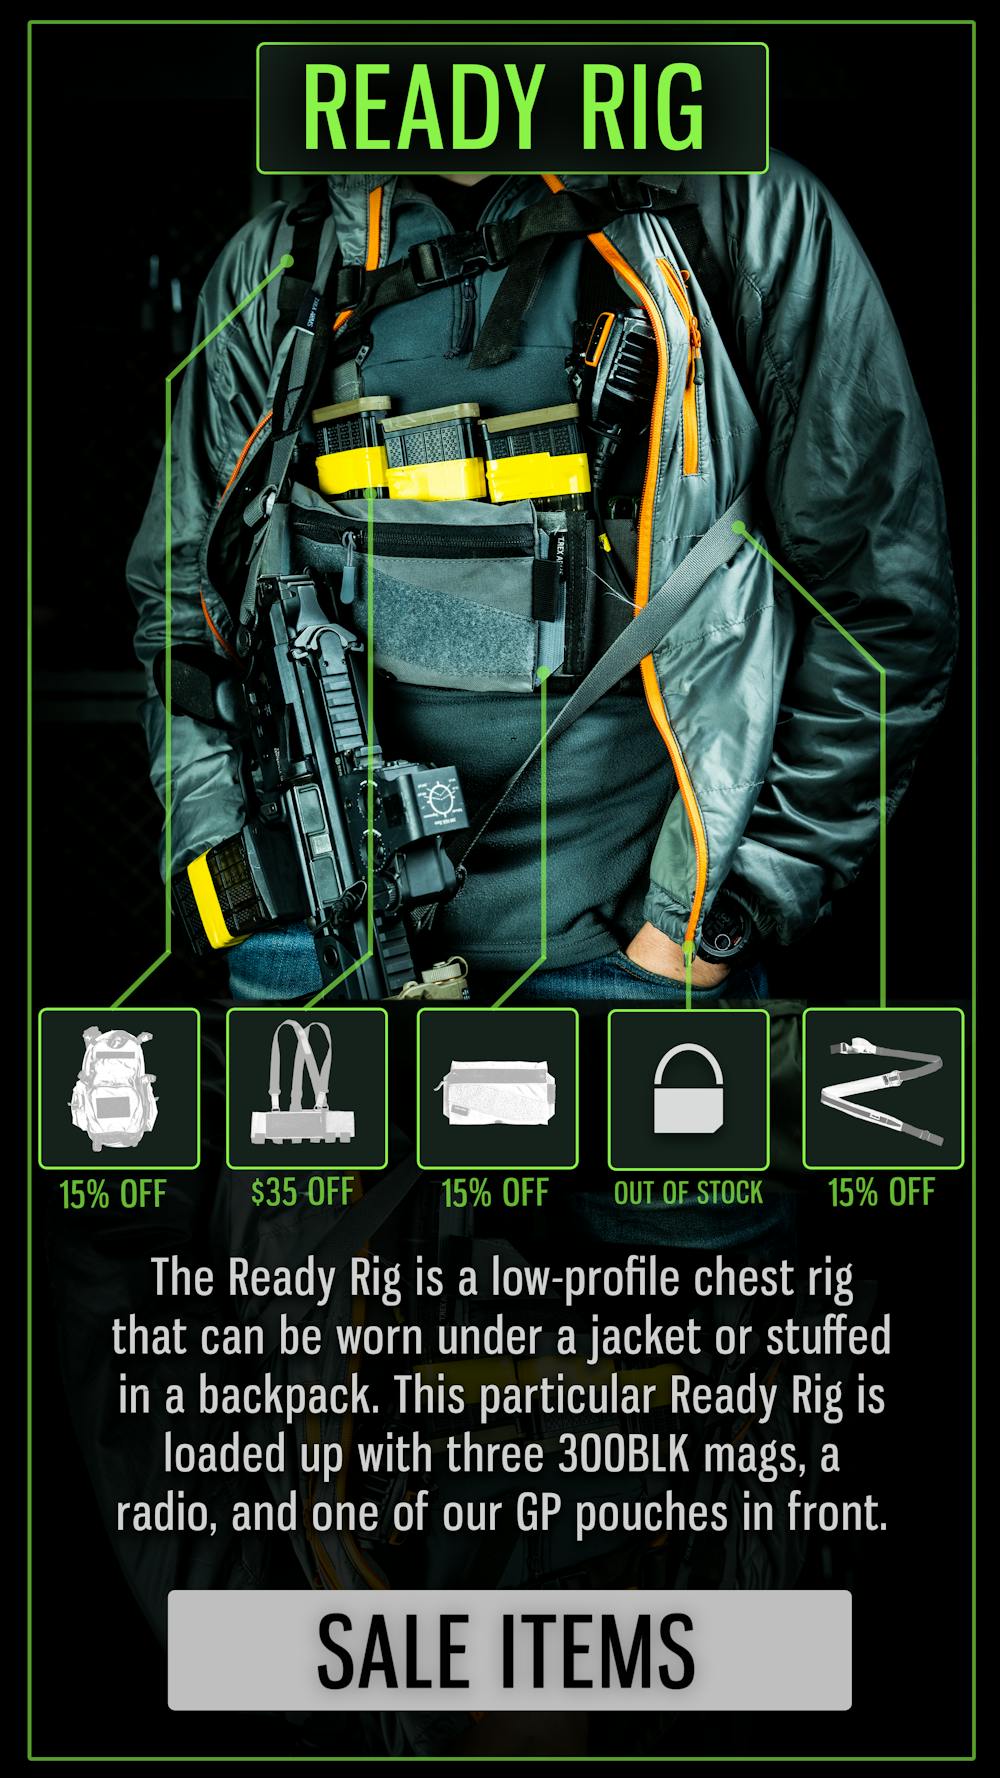 READY RIG

The Ready Rig is a low-profile chest rig that can be worn under a jacket or stuffed in a backpack. This particular Ready Rig is loaded up with three 300BLK mags, a radio, and one of our GP pouches in front.

SALE ITEMS